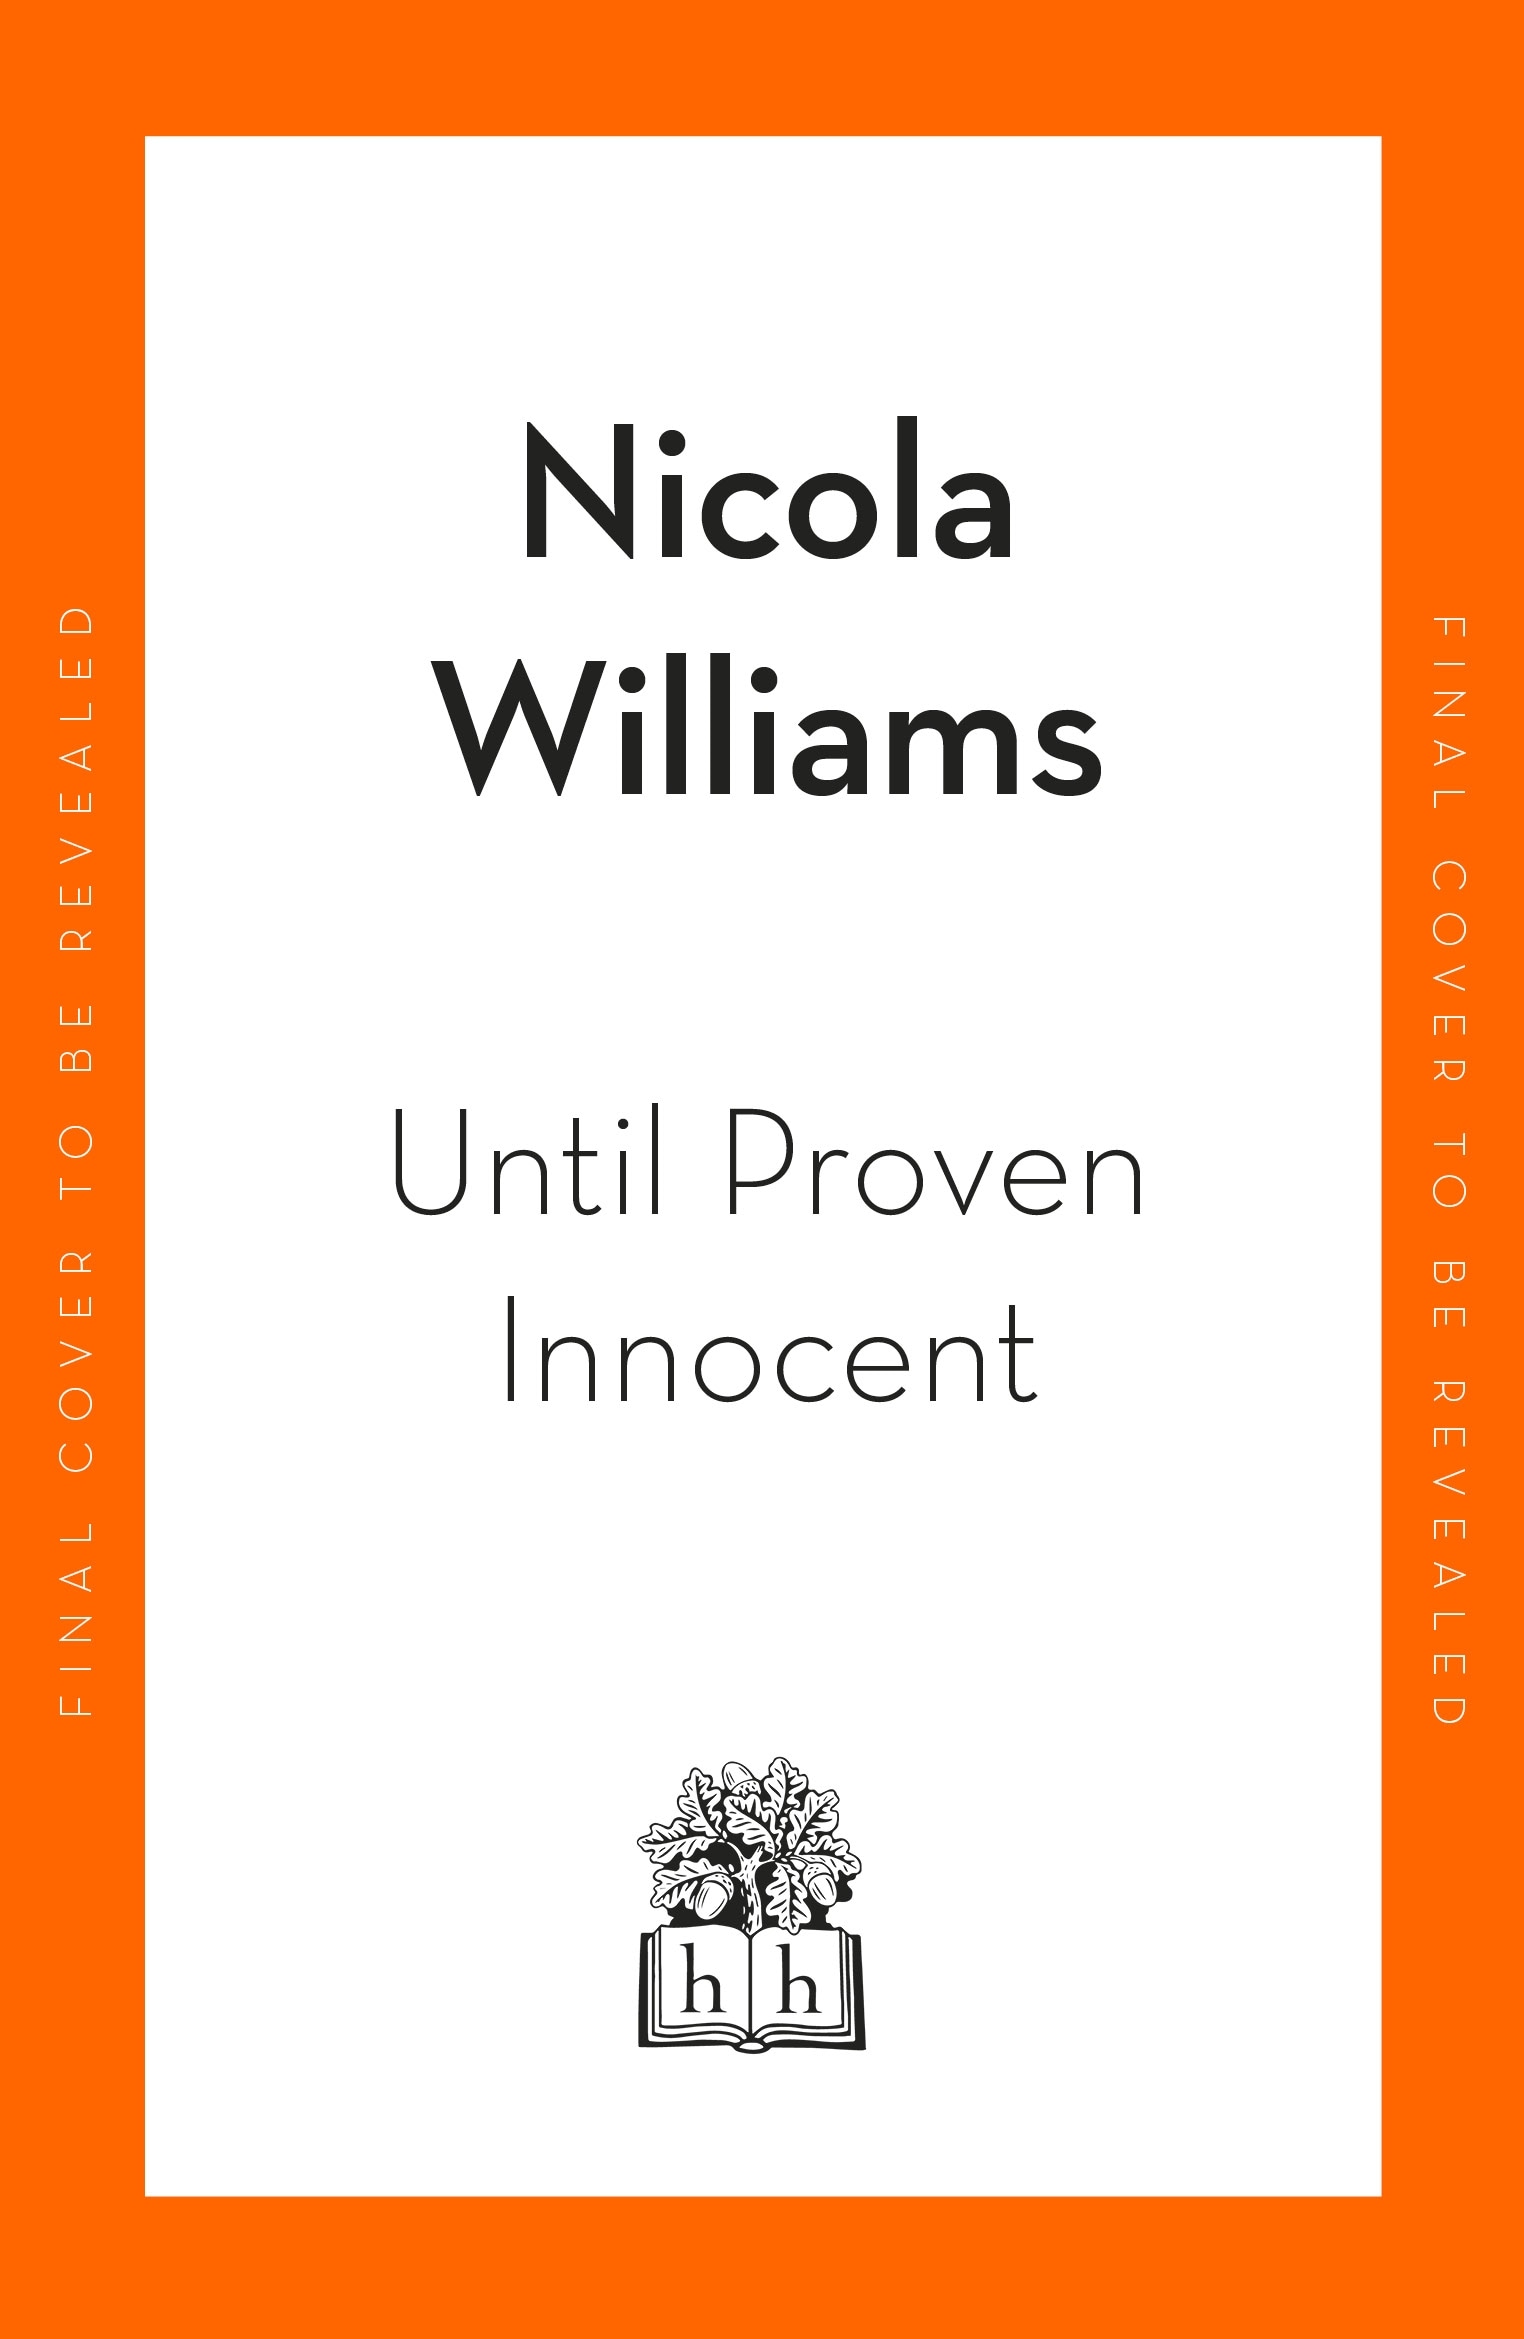 Book “Until Proven Innocent” by Nicola Williams — March 16, 2023